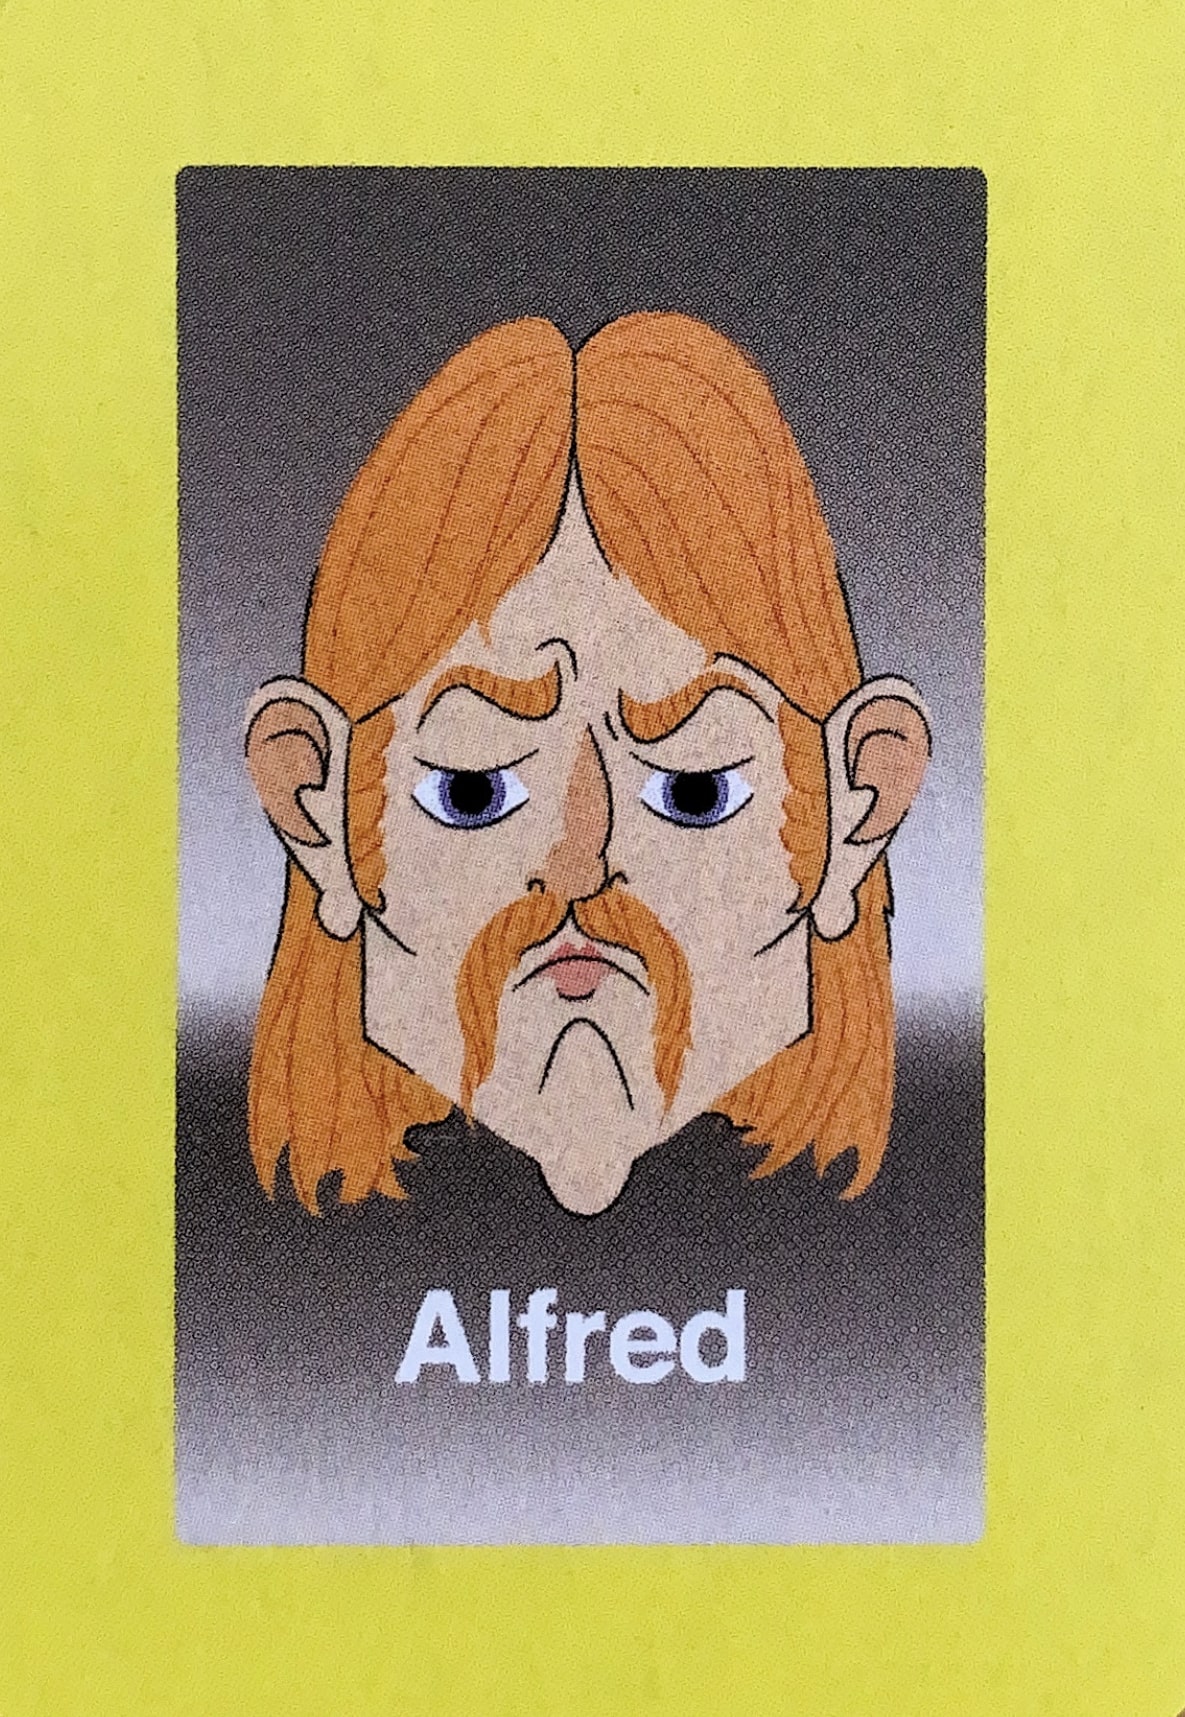  - While his sad eyes on the Guess Who?® card may have been uncomfortable for children playing the game, those same eyes were noticed by modeling agencies immediately upon the game’s release. Alfred had a torrid run at the top of the fashion world, becoming much more than just another Guess Who?® face. He was also a well-known advocate for red haired people all over, publicly expressing that discrimination based on brightly colored hair had gone on far too long. He died at the age of 38 in a tragic photoshoot.